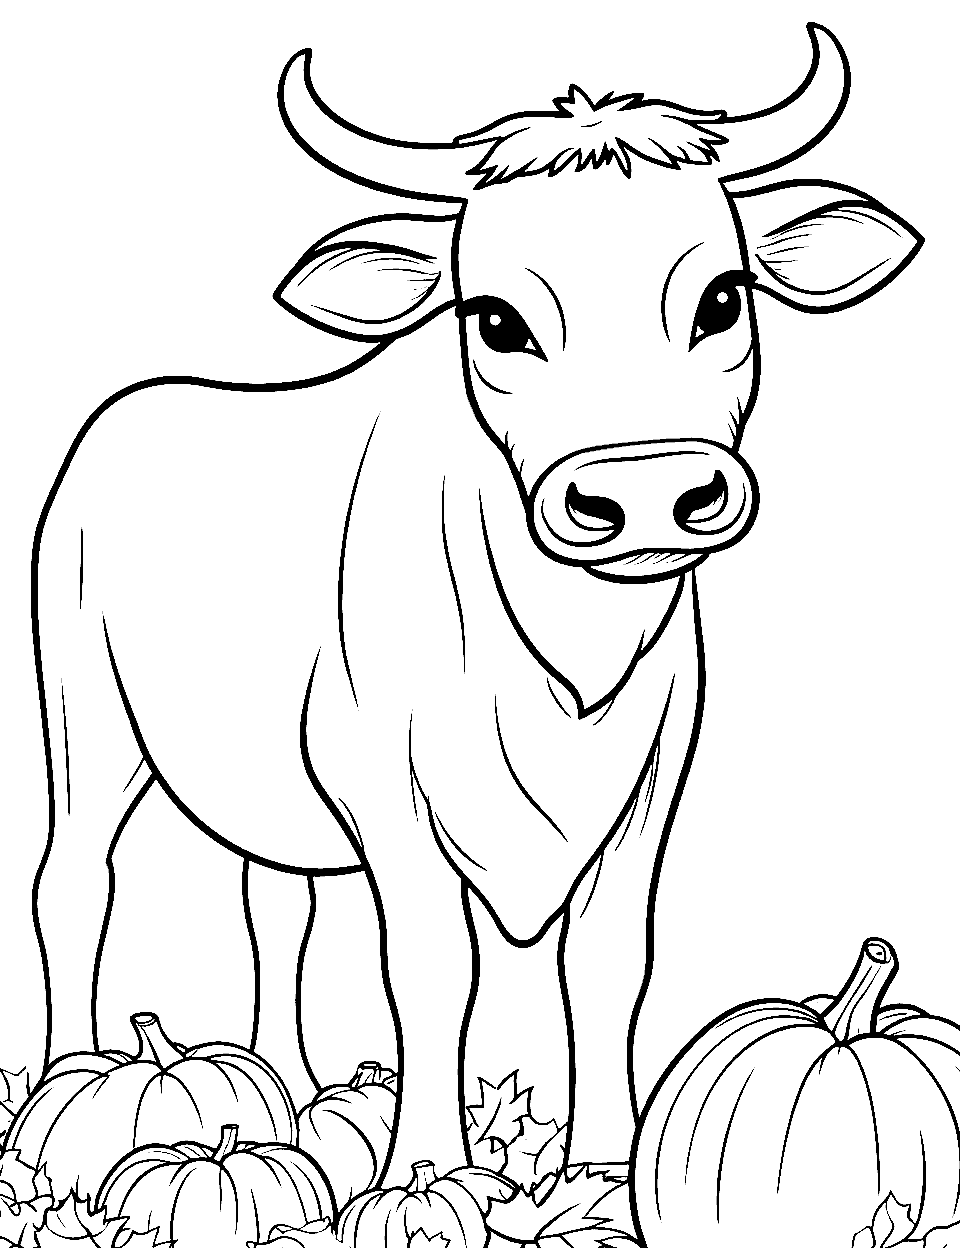 Harvest Time Cow Coloring Page - A cow, moving between simple, oversized pumpkins in a field.